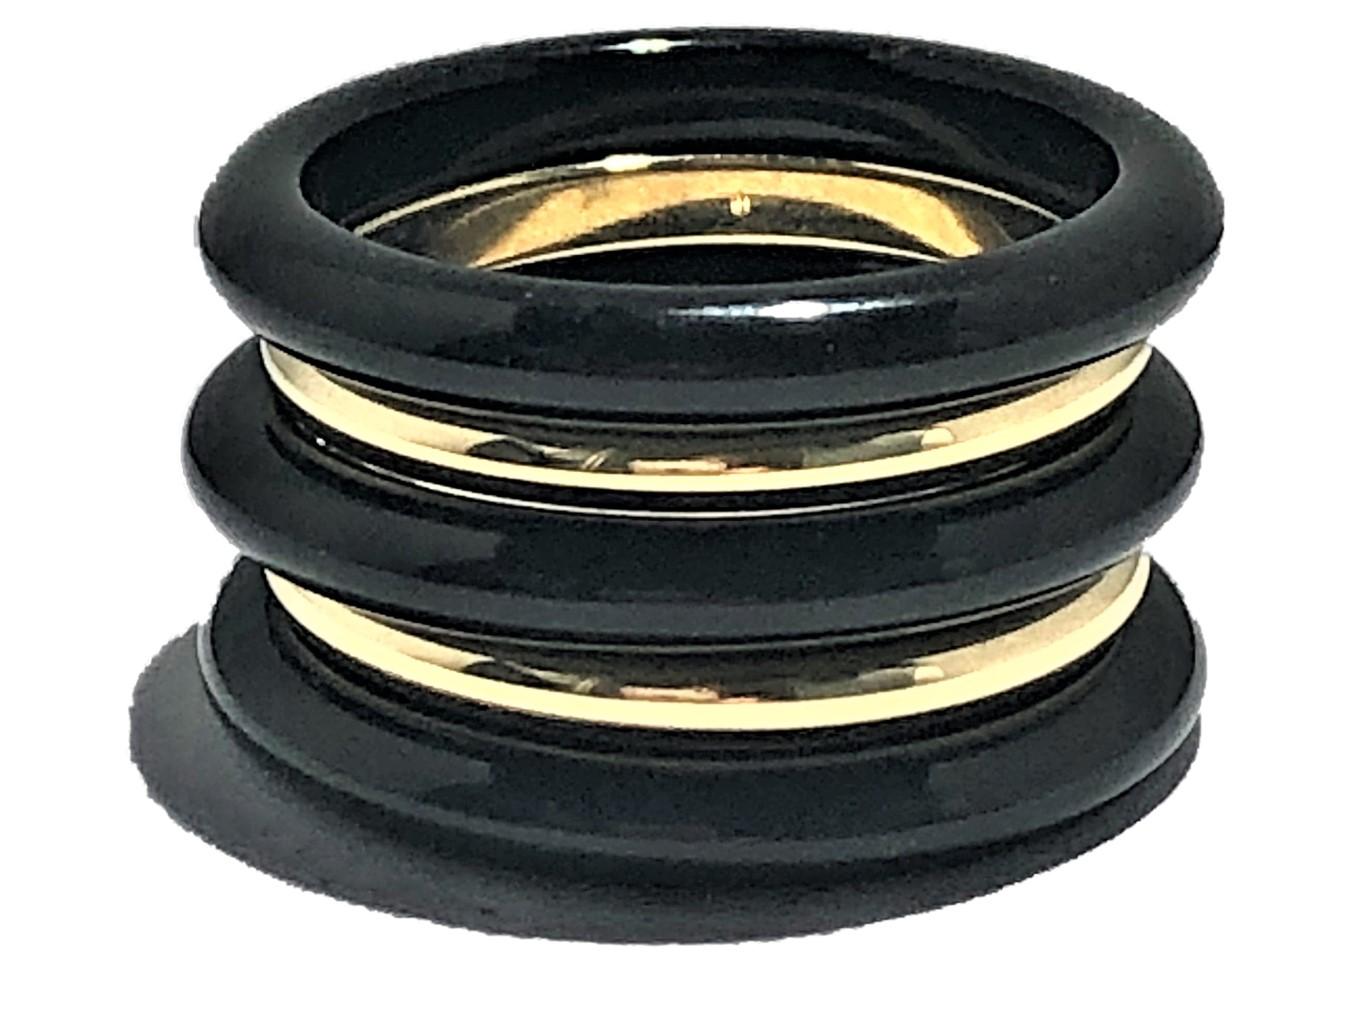 This tailored versatile set of stacking bands is comprised of three 3mm wide onyx bands alternating with two 2mm wide 18K Yellow Gold bands. The set looks and feels great. The five bands measure 1/2 inch wide when worn together. The gold bands are